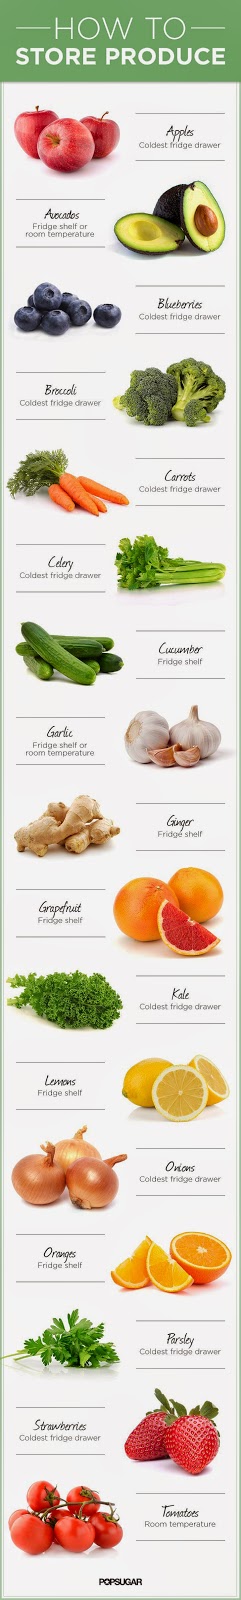 hover_share weight loss - how to store produce